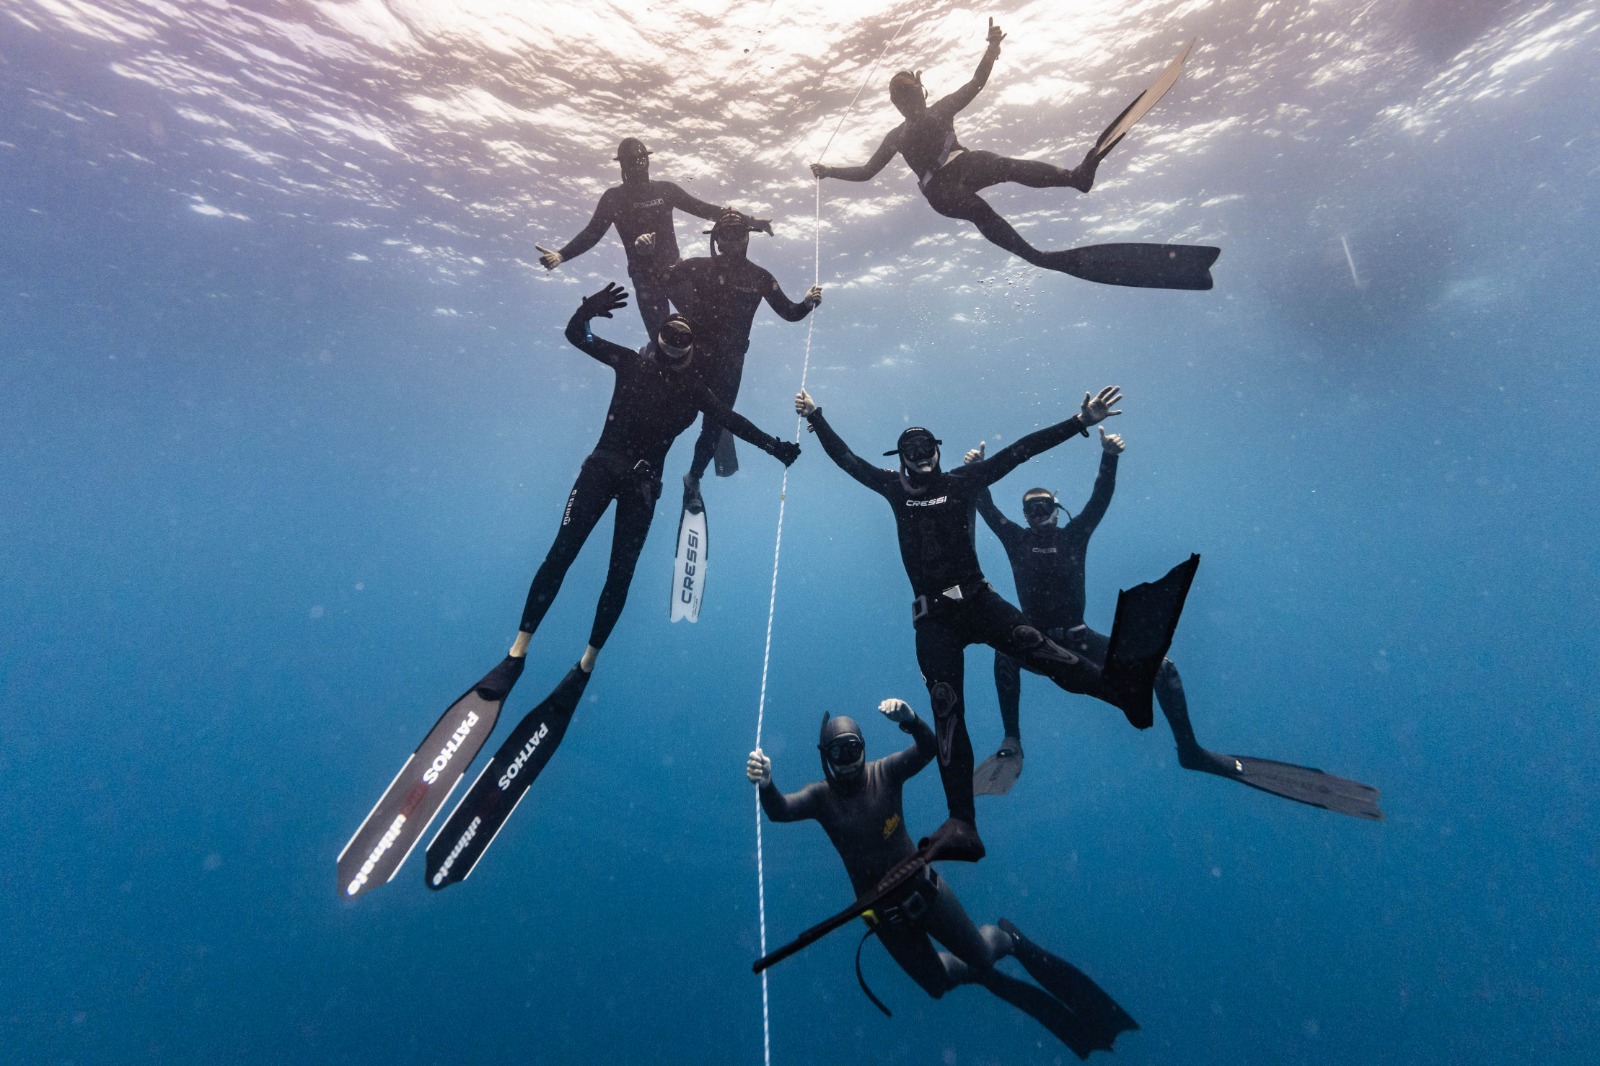 Group picture freediving